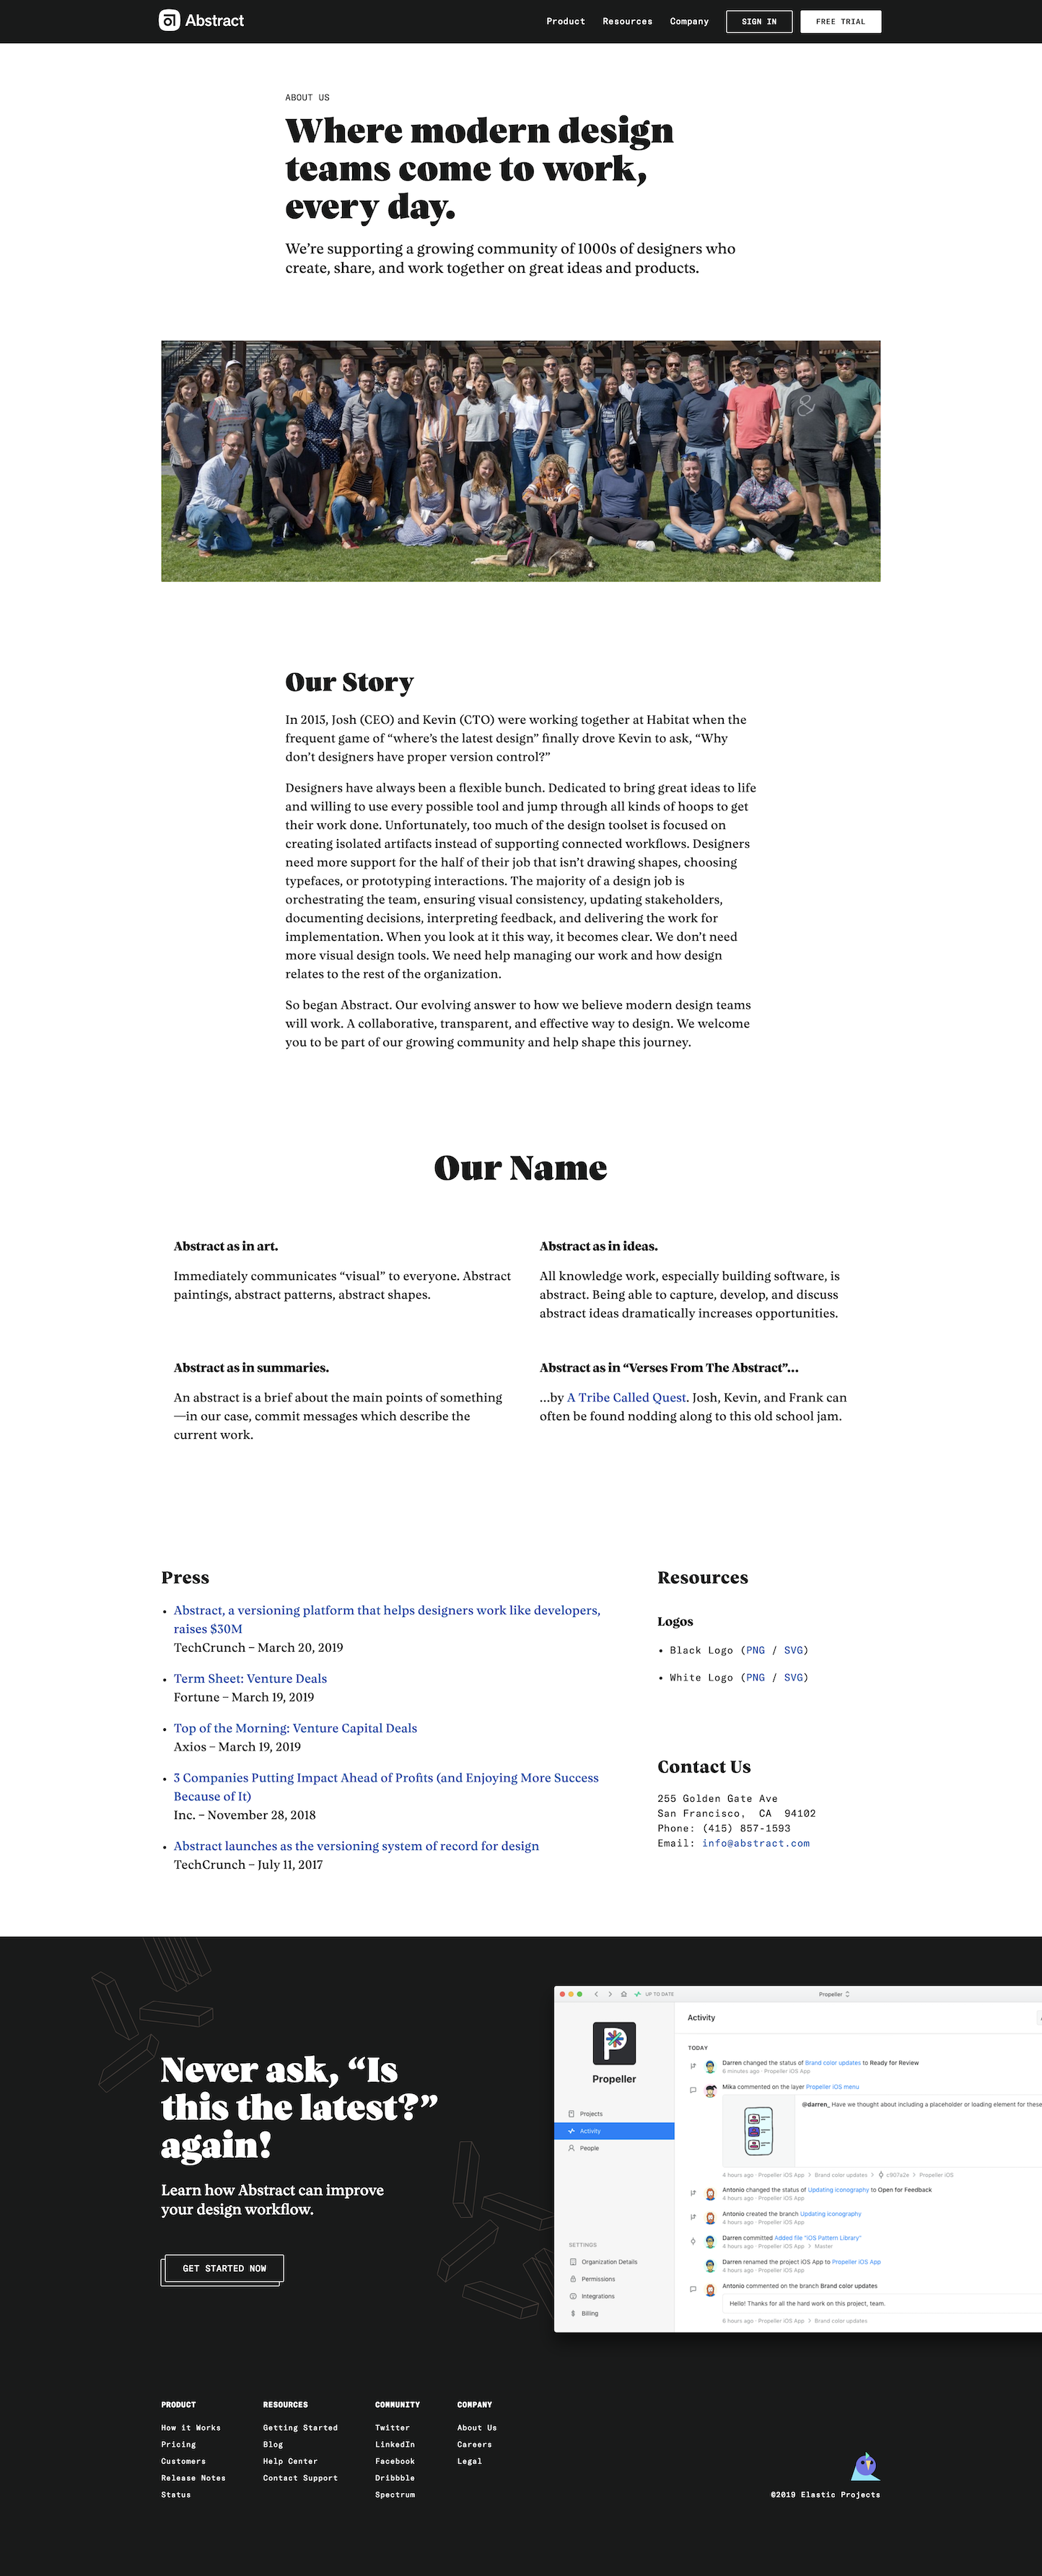 Screenshot of the About page from the Abstract website.